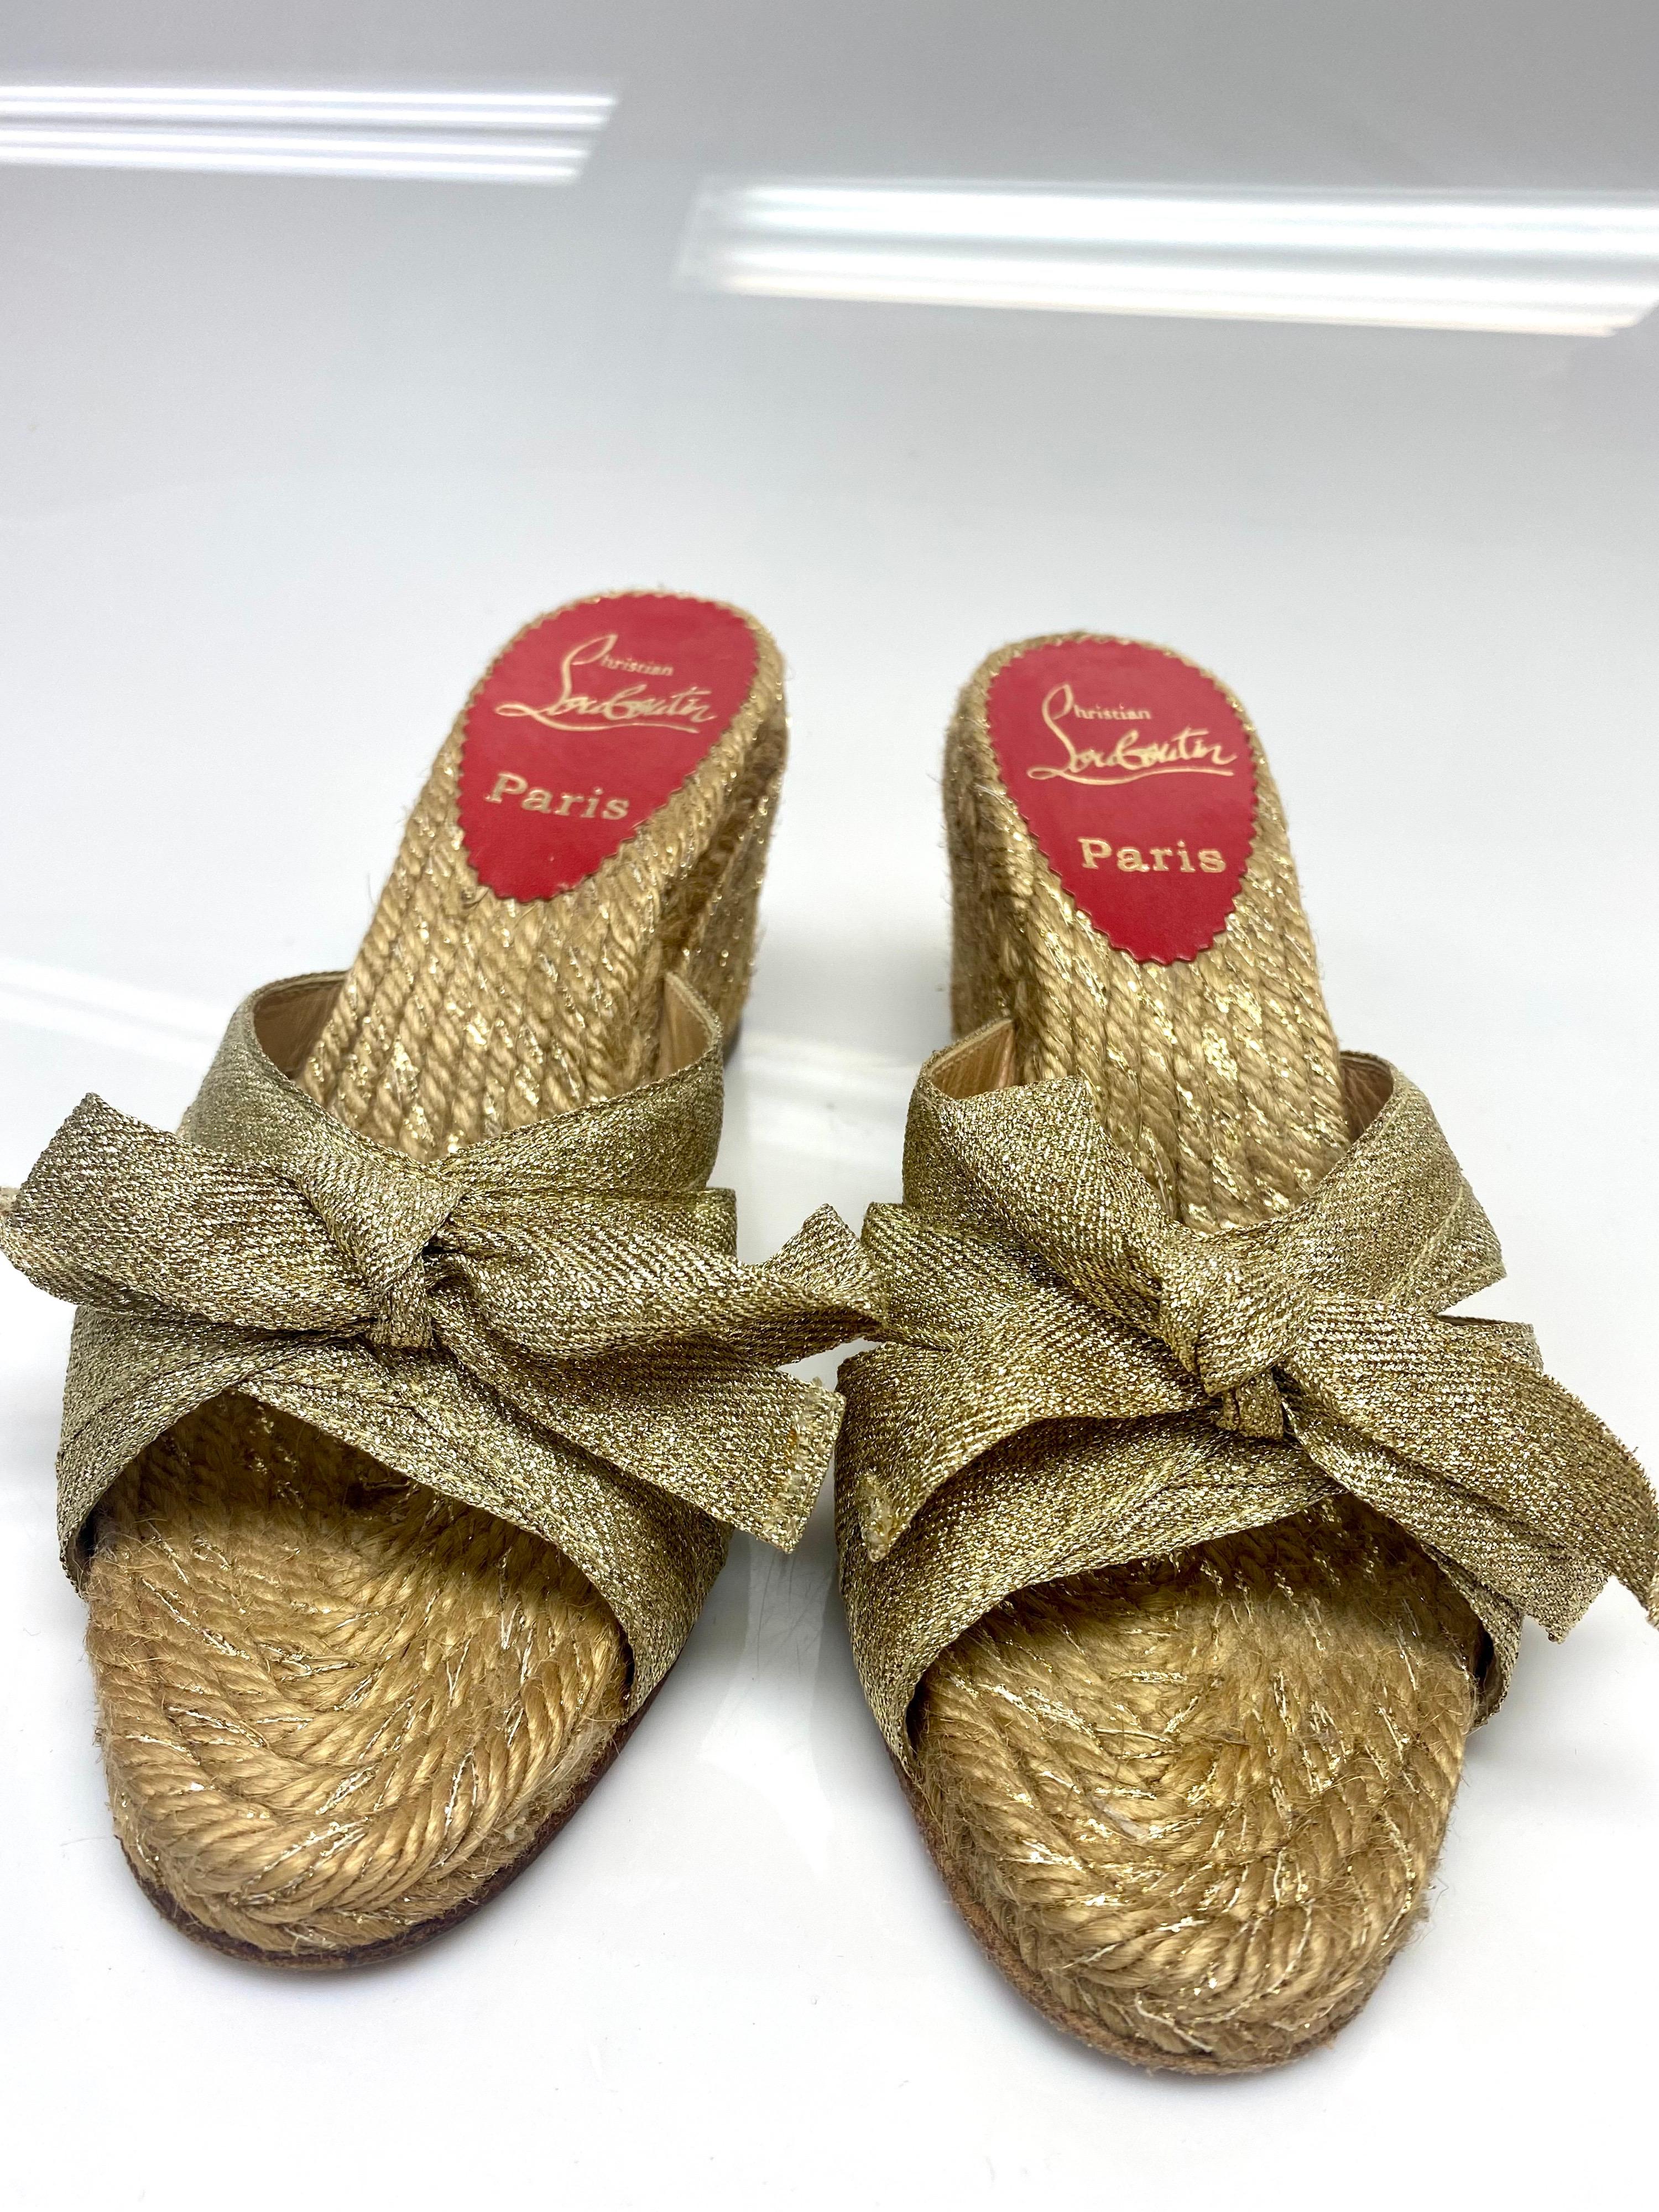 Christian Louboutin Gold Metallic Raffia Wedge - Size 35 In Good Condition For Sale In West Palm Beach, FL